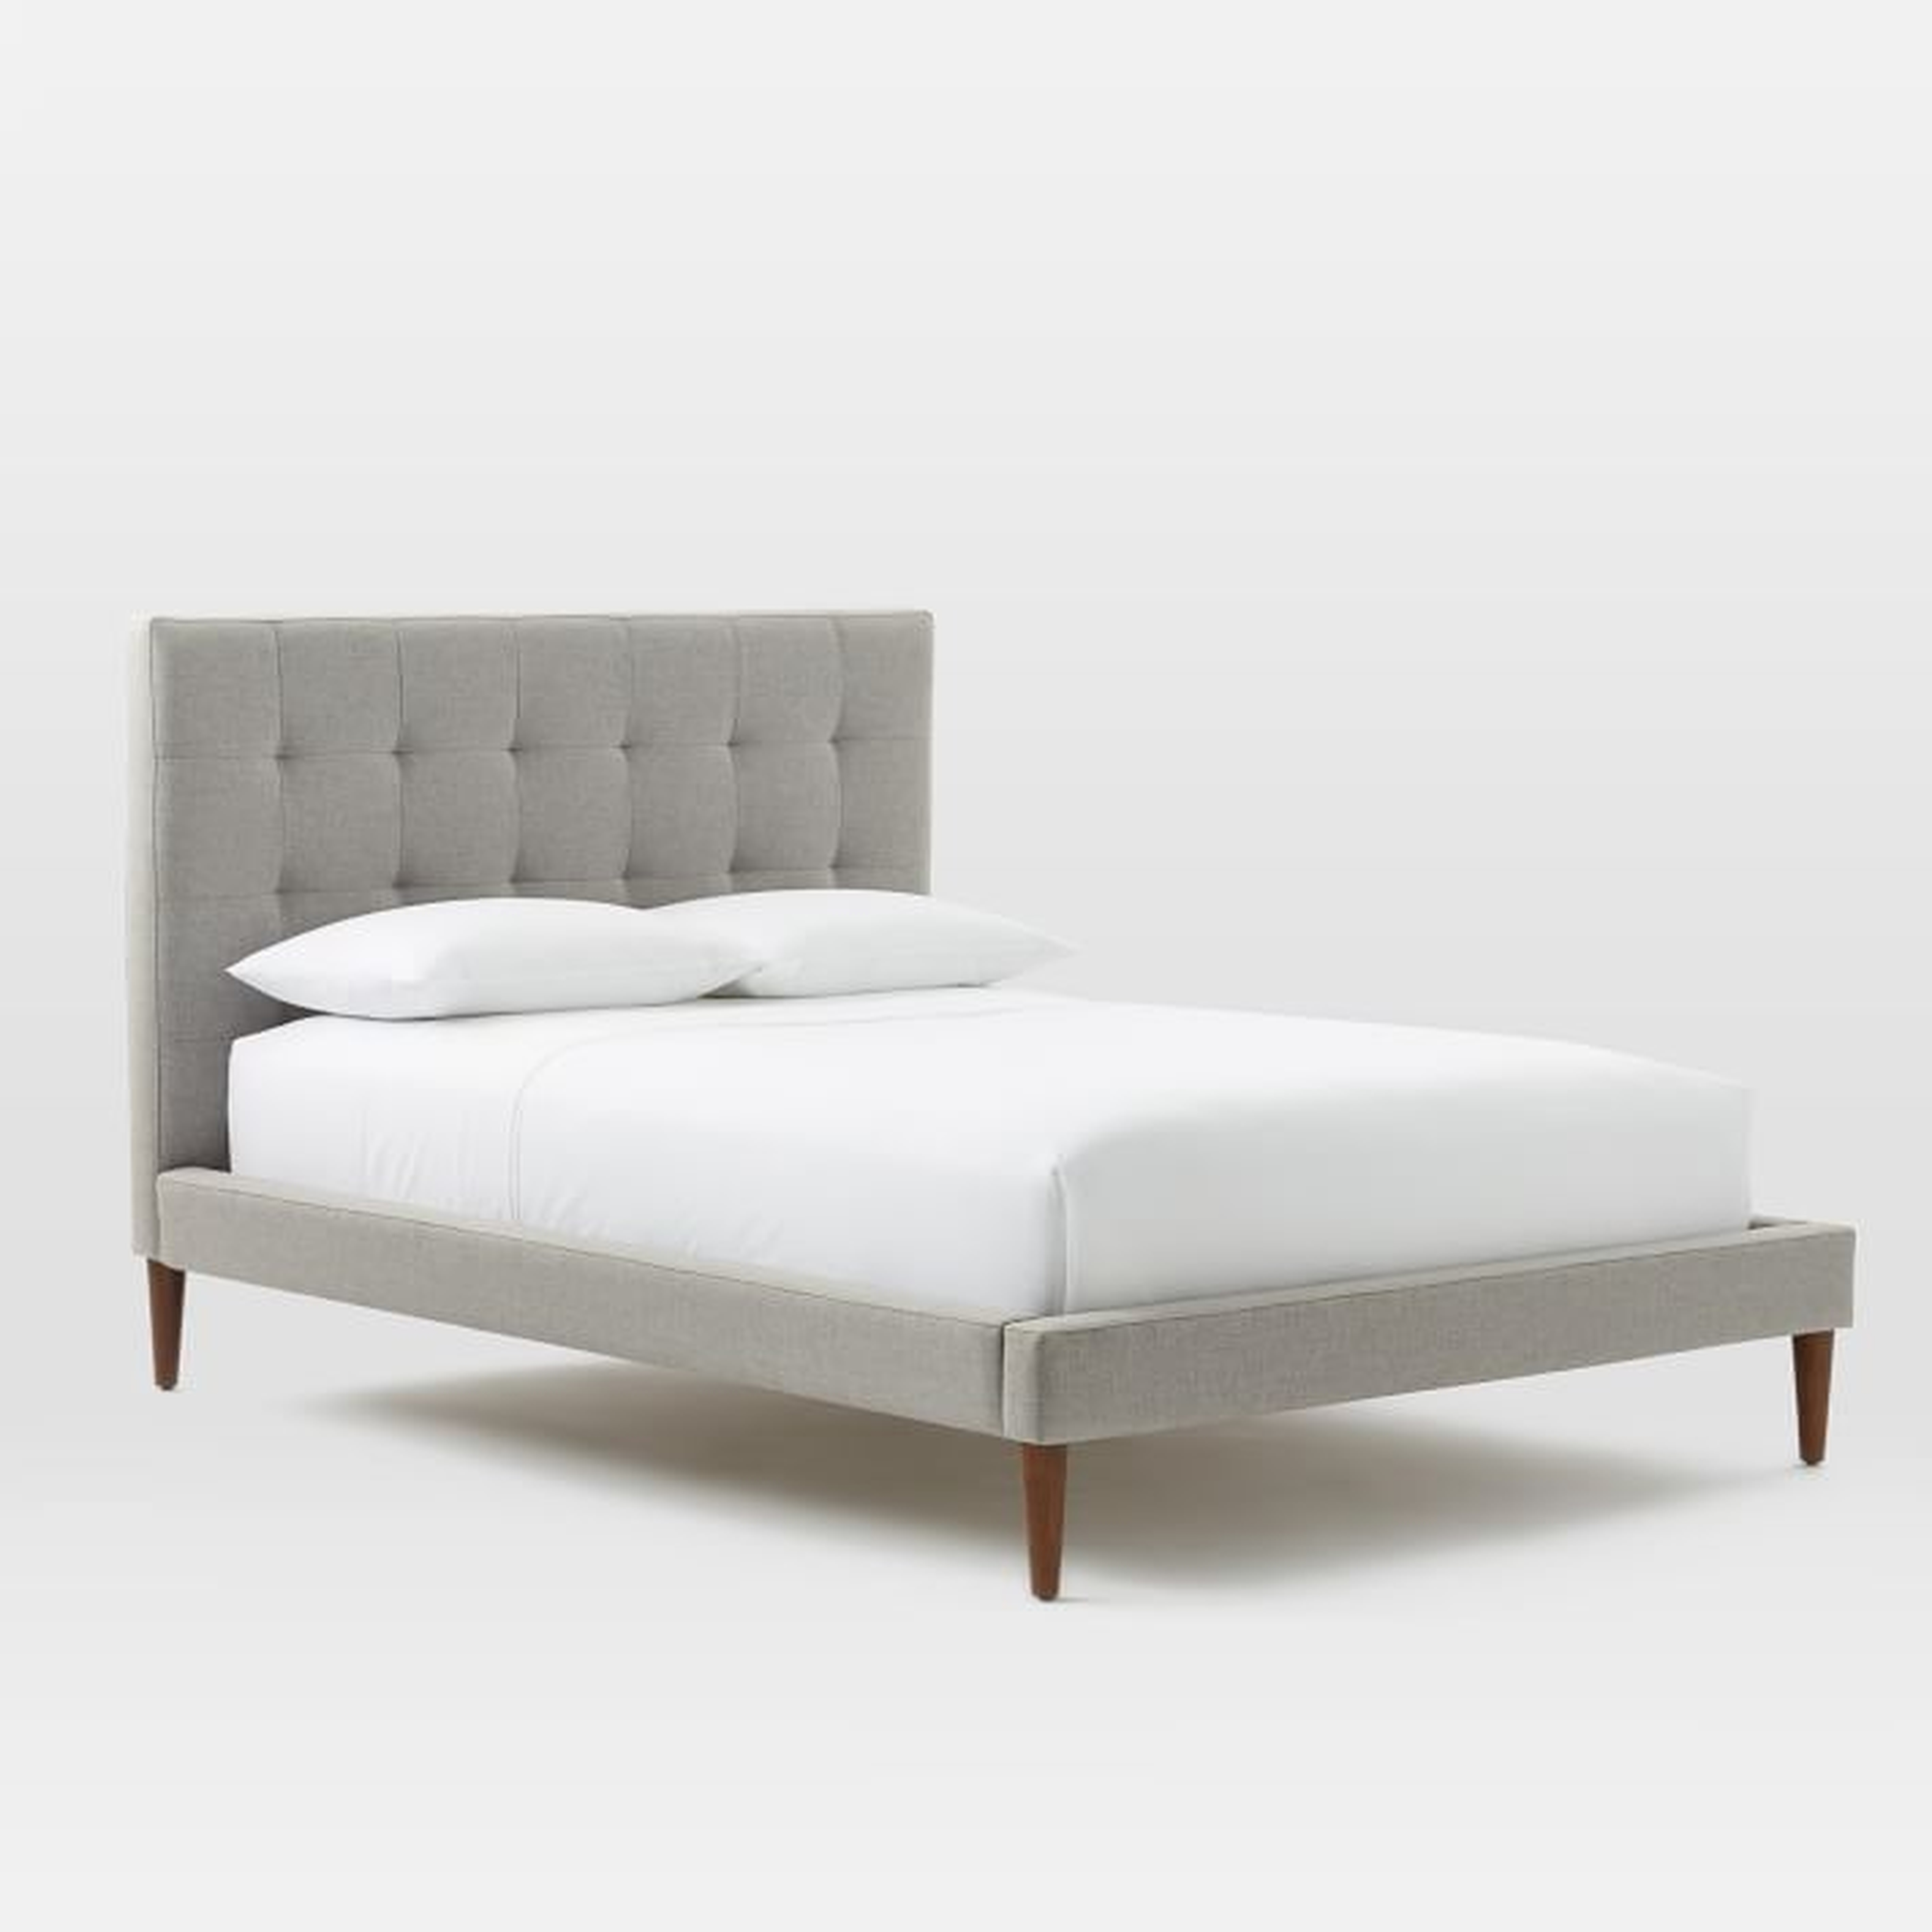 Grid-Tufted Upholstered Tapered Leg Bed - King - Heathered Crosshatch, Feather Grey - West Elm